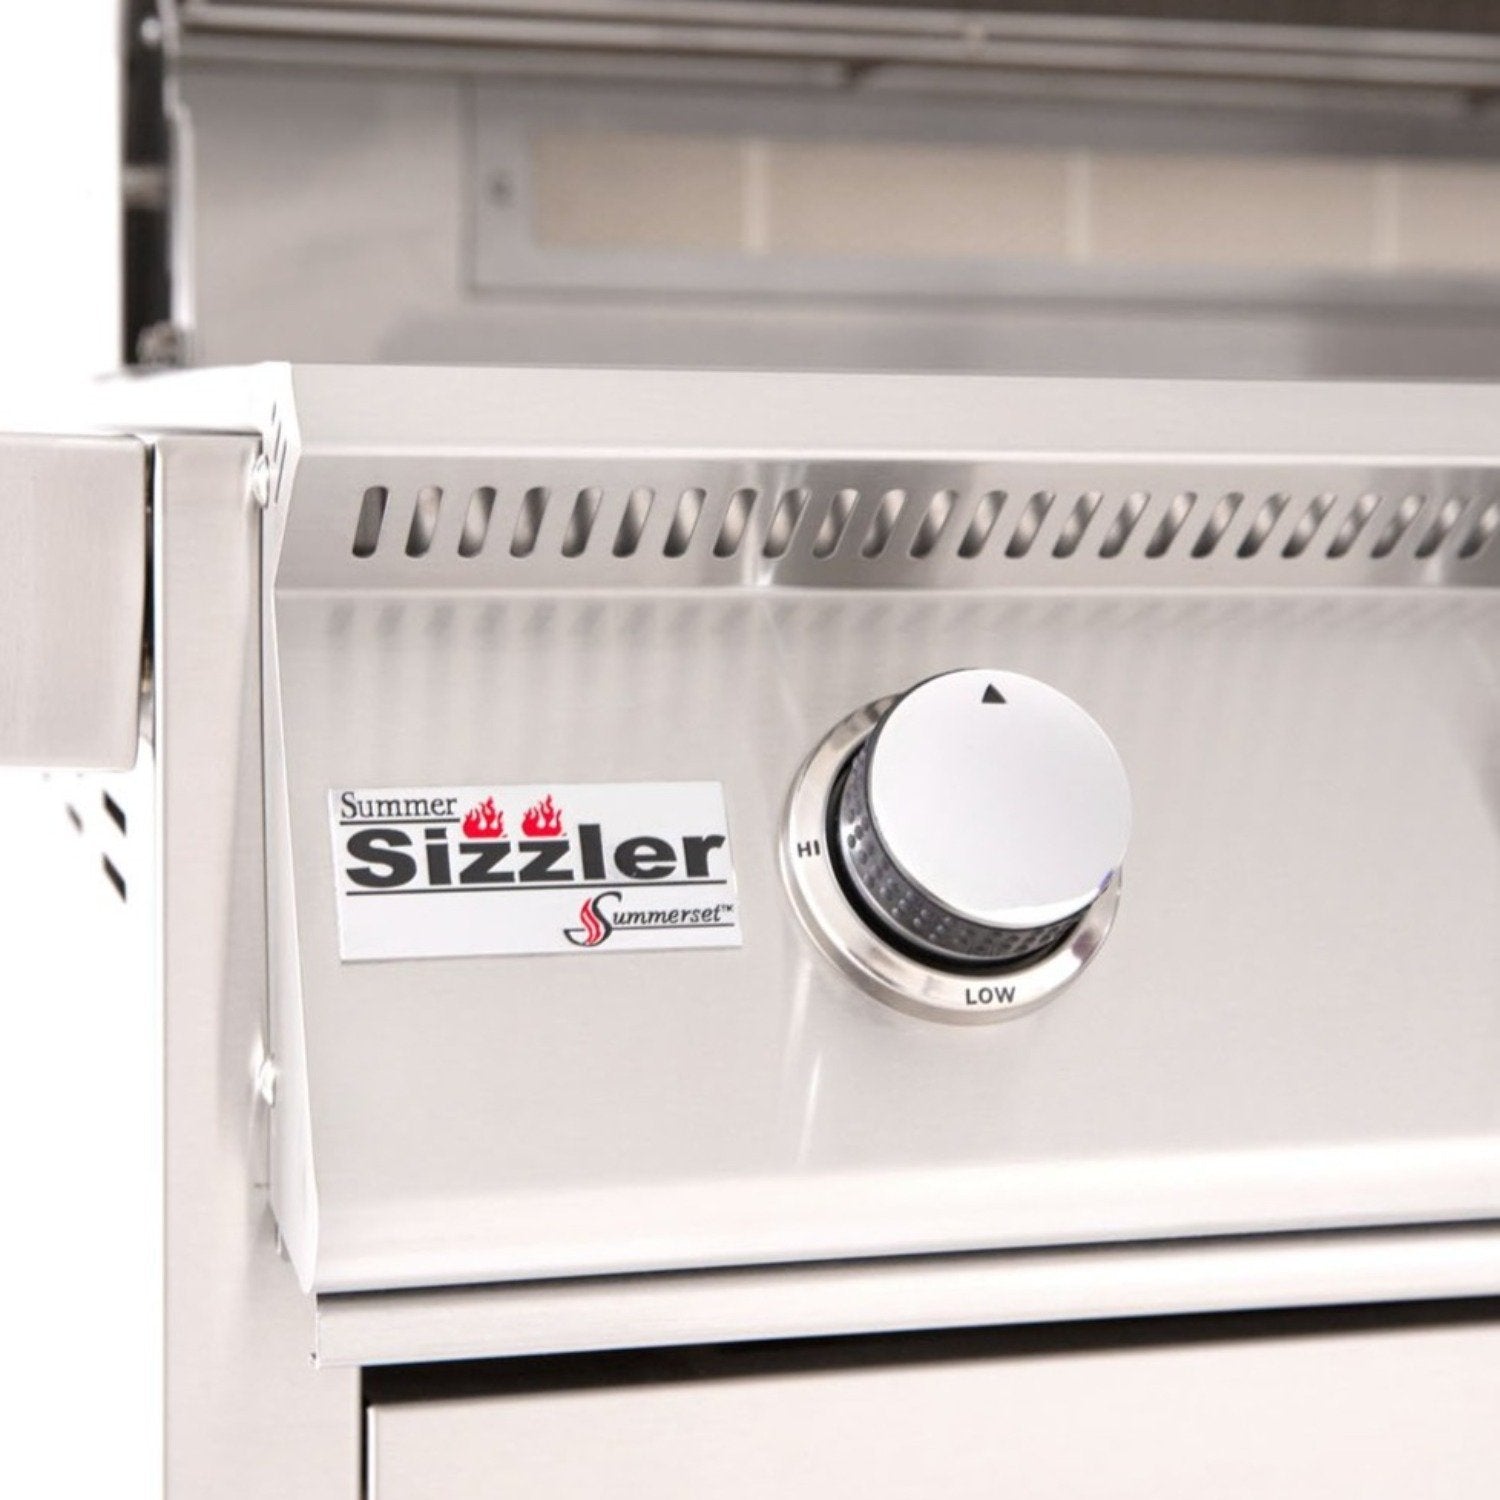 Summerset SIZ32 Sizzler Series 32-Inch Built-in Grill - grillsNmore.com